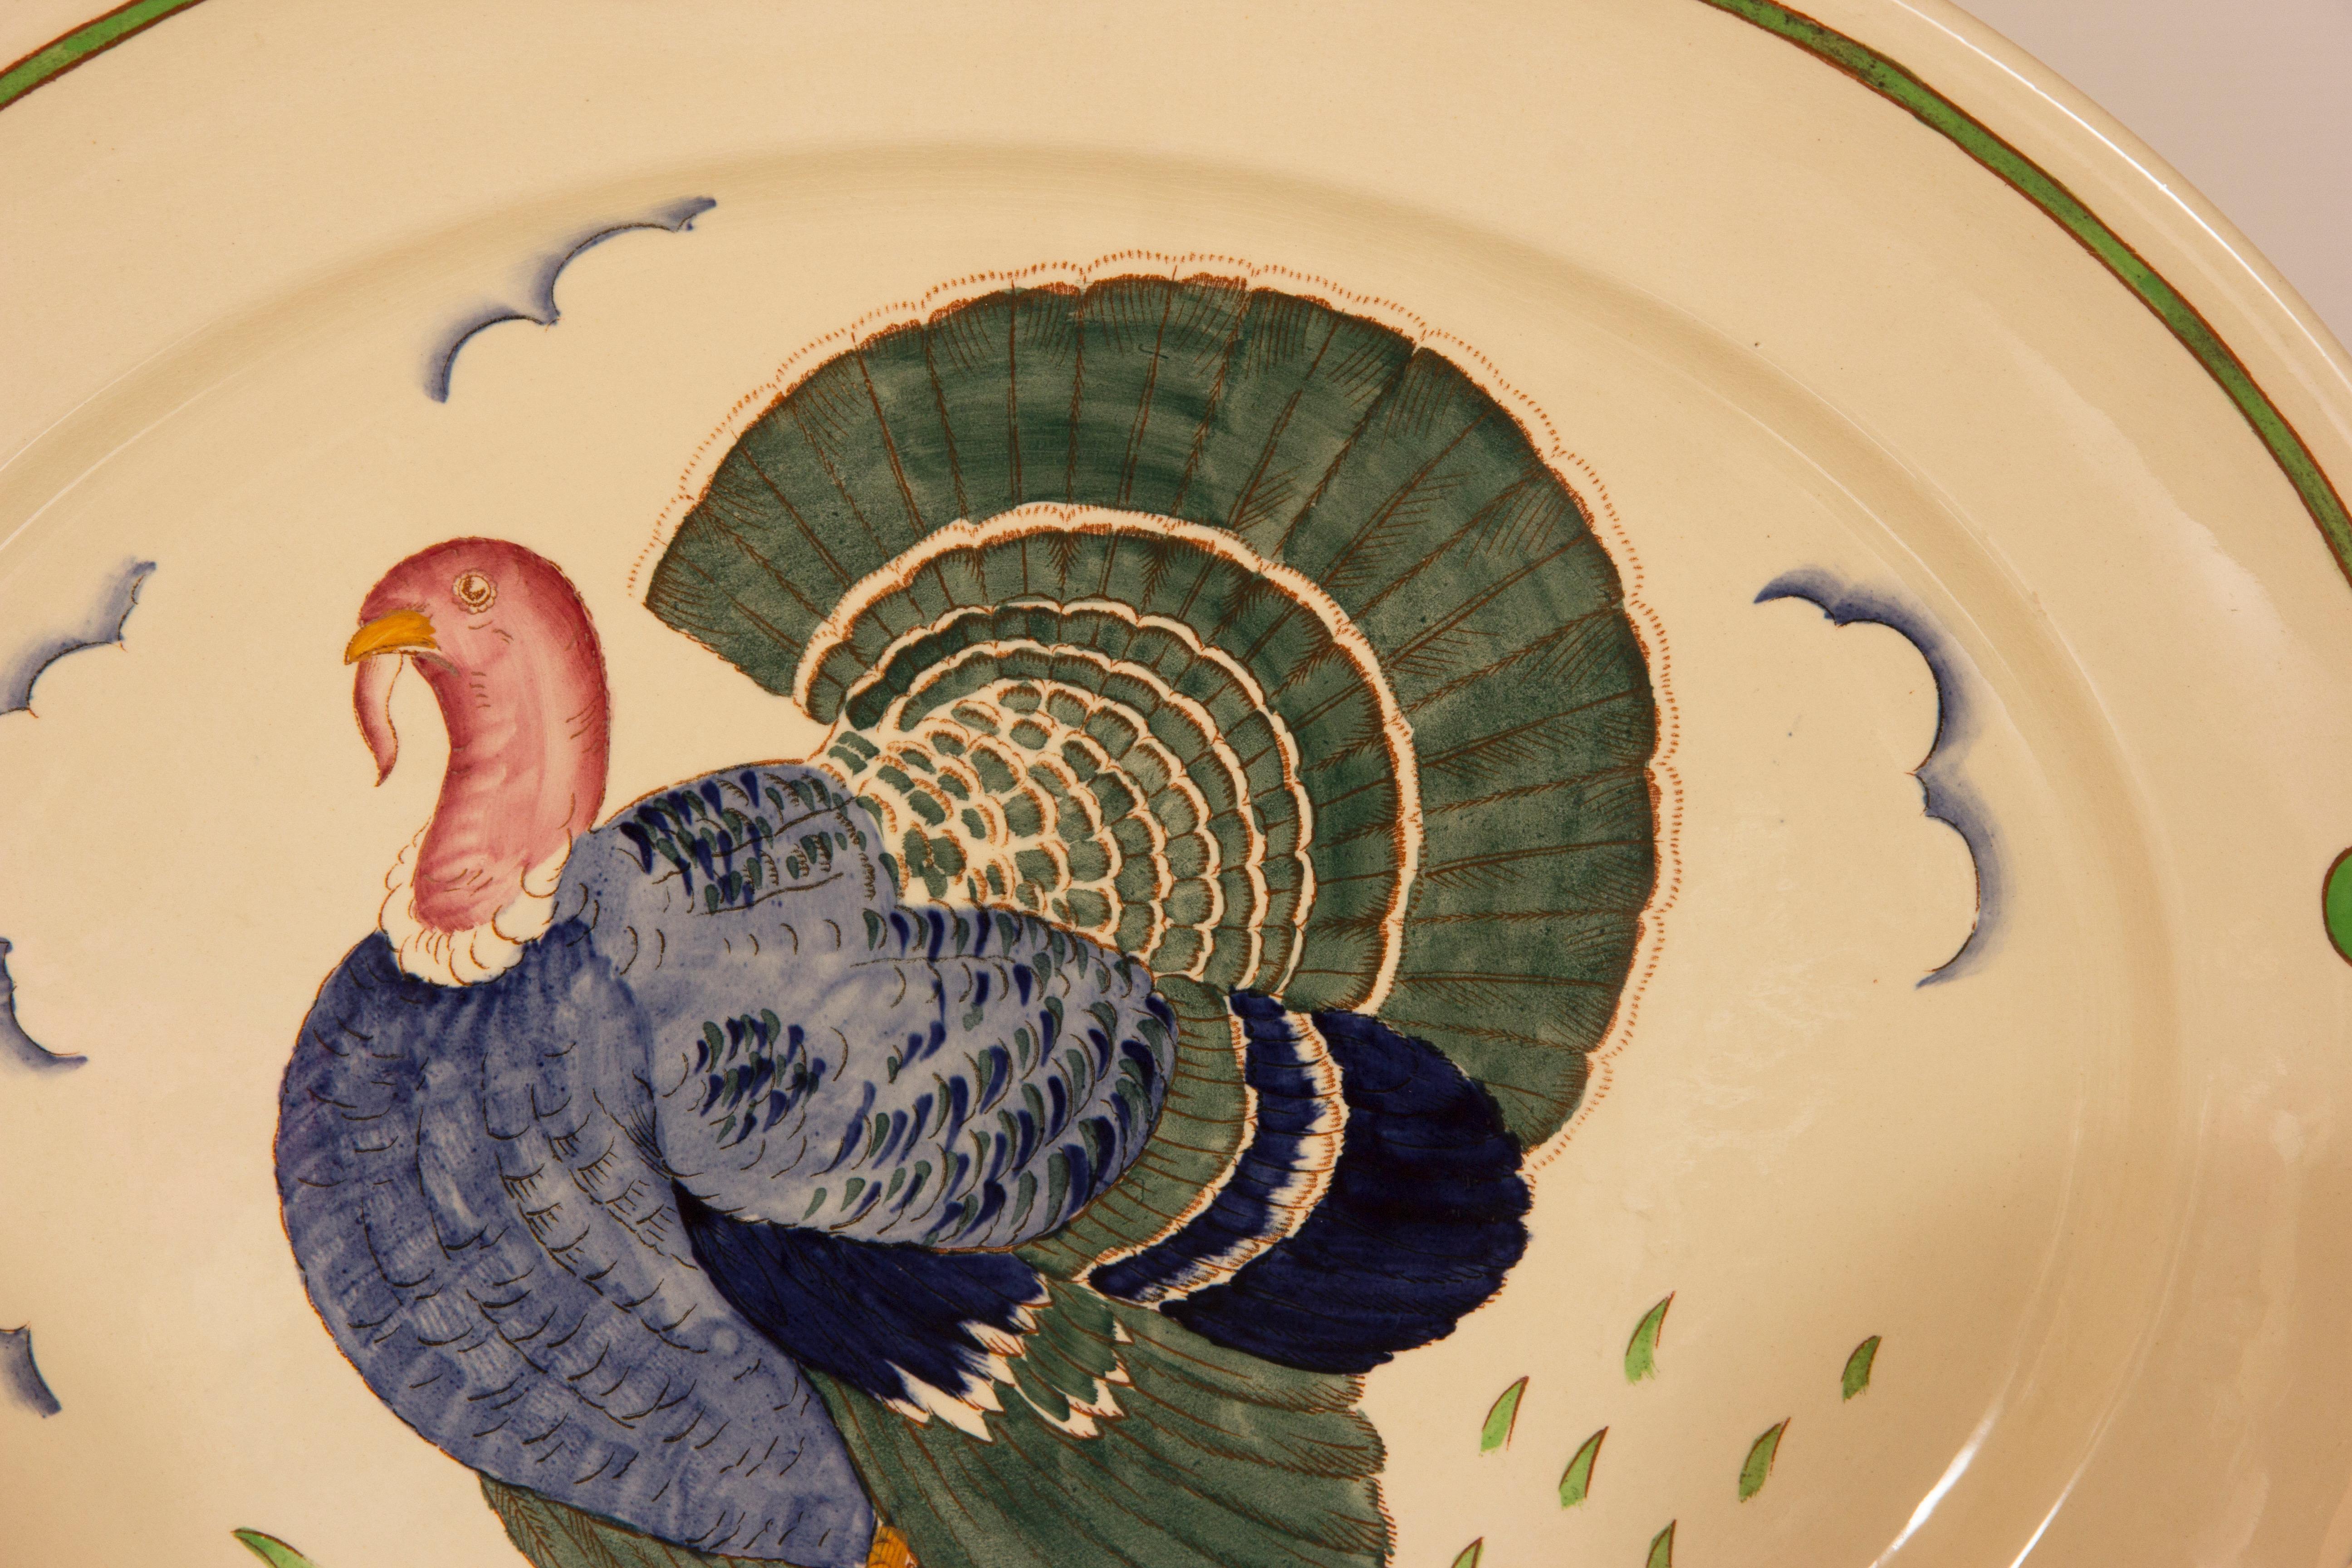 Art Deco Thanksgiving set, hand-painted Turkey design by Harold Bennett for Burgess and Leigh, Harold was the Art director at Burgess and Leigh.
Measures: Large plate W: 45 cm D: 38 cm
Small plate W: 25 cm D: 25 cm
British, circa 1930.